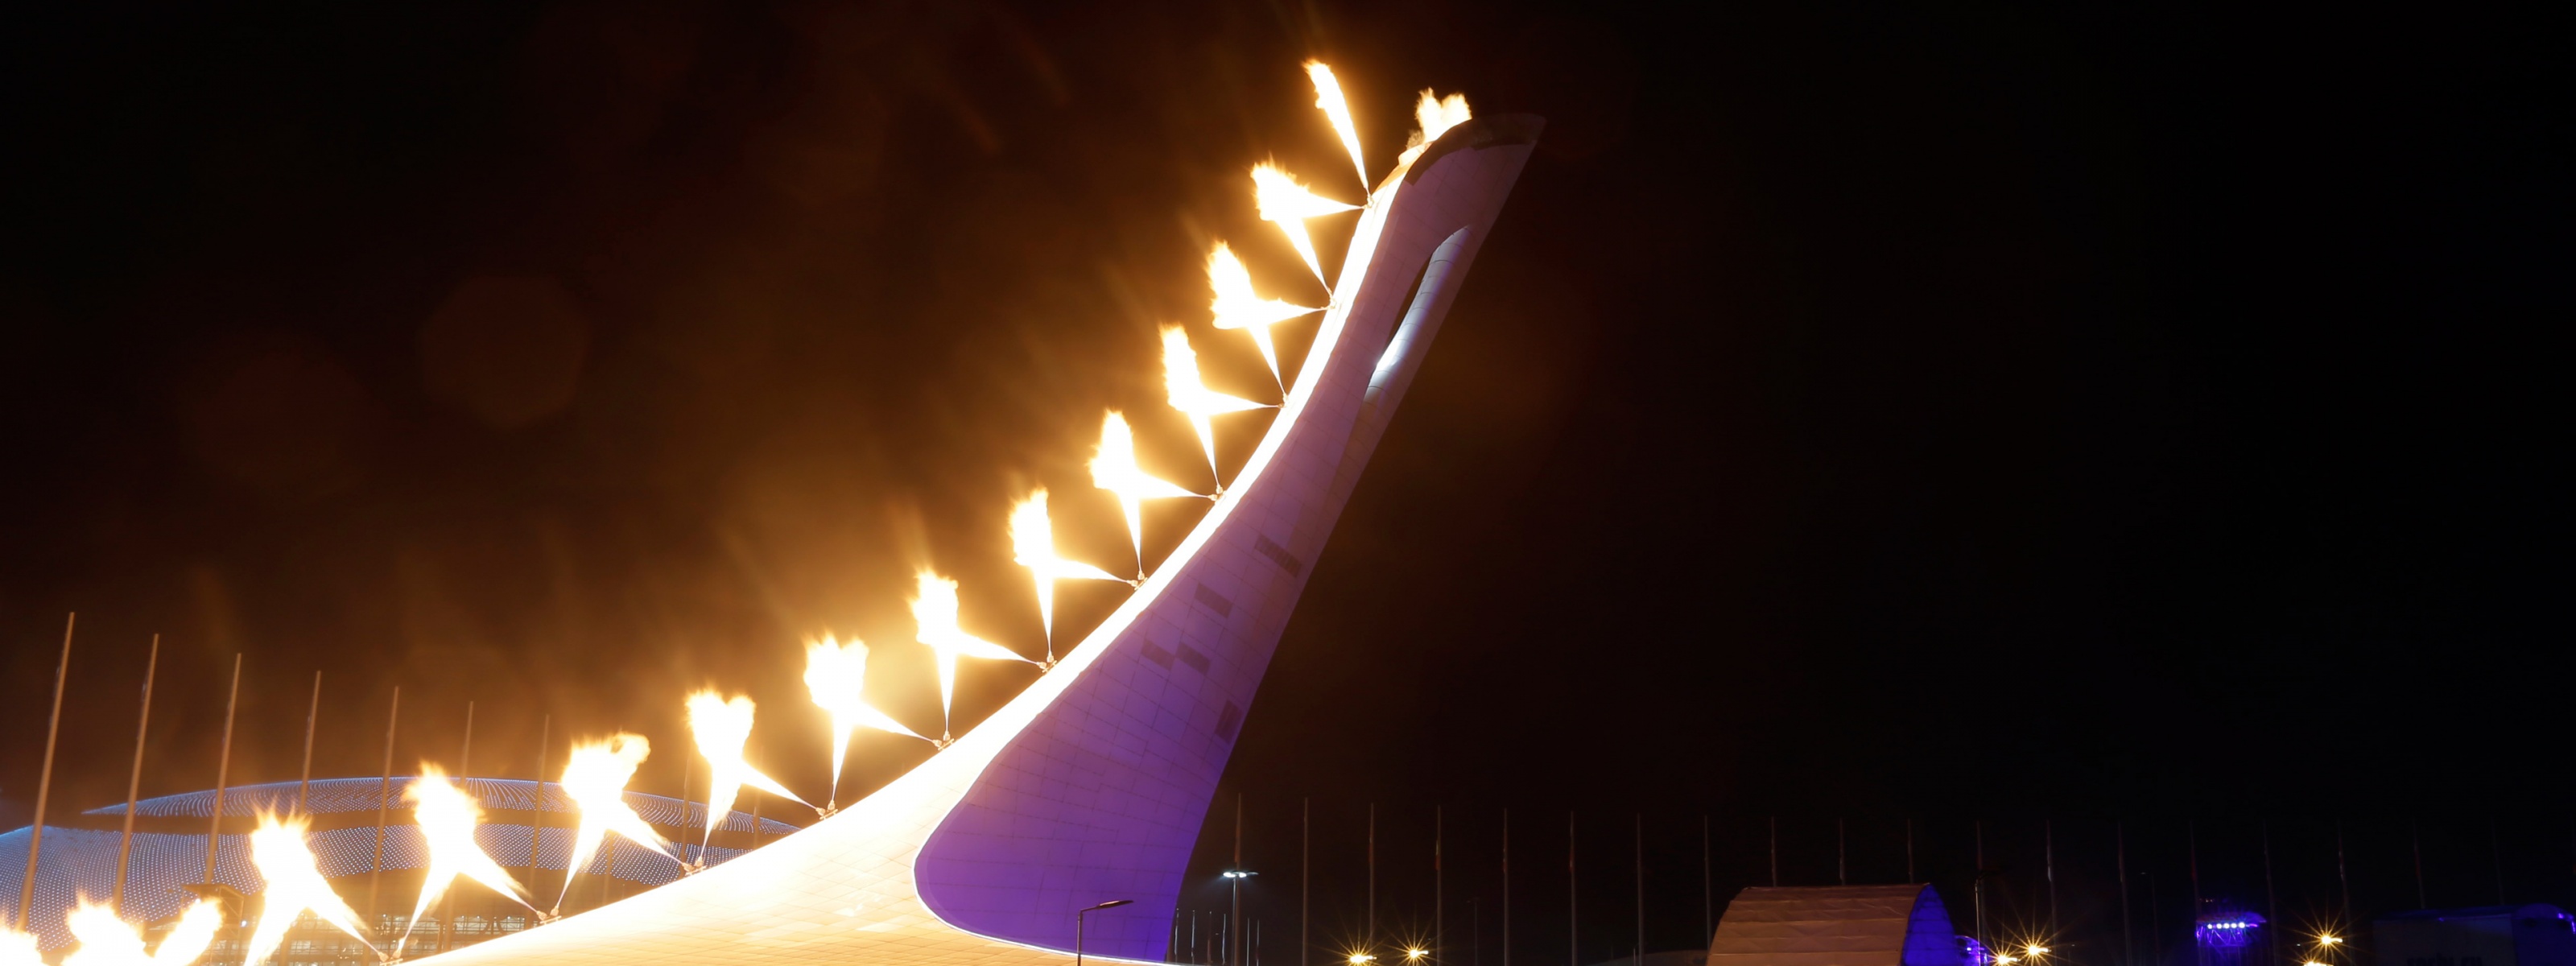 The Olympic Flame - Sochi 2014